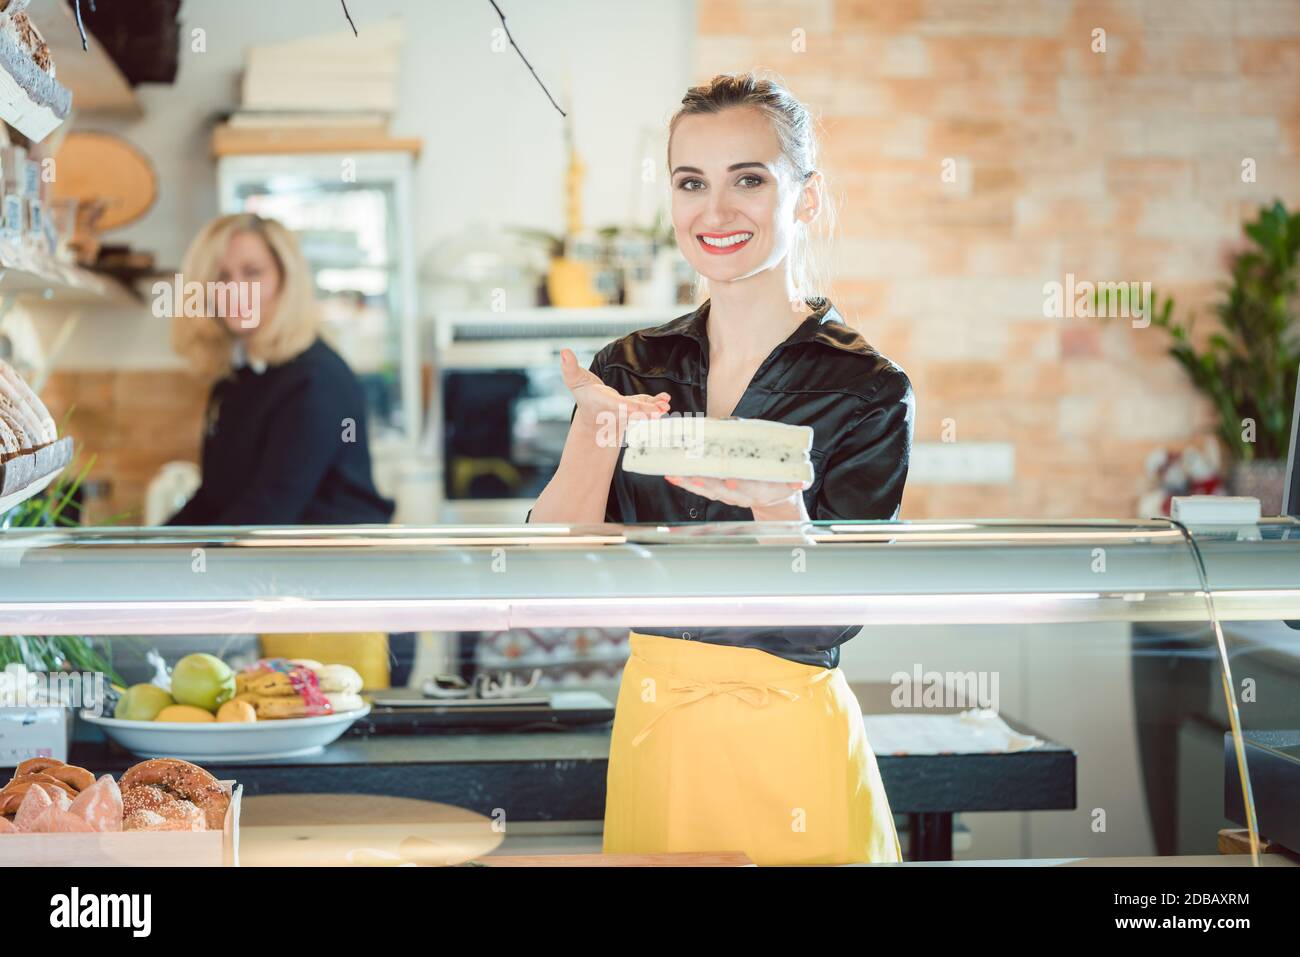 Friendly women selling cheese at counter in a supermarket Stock Photo